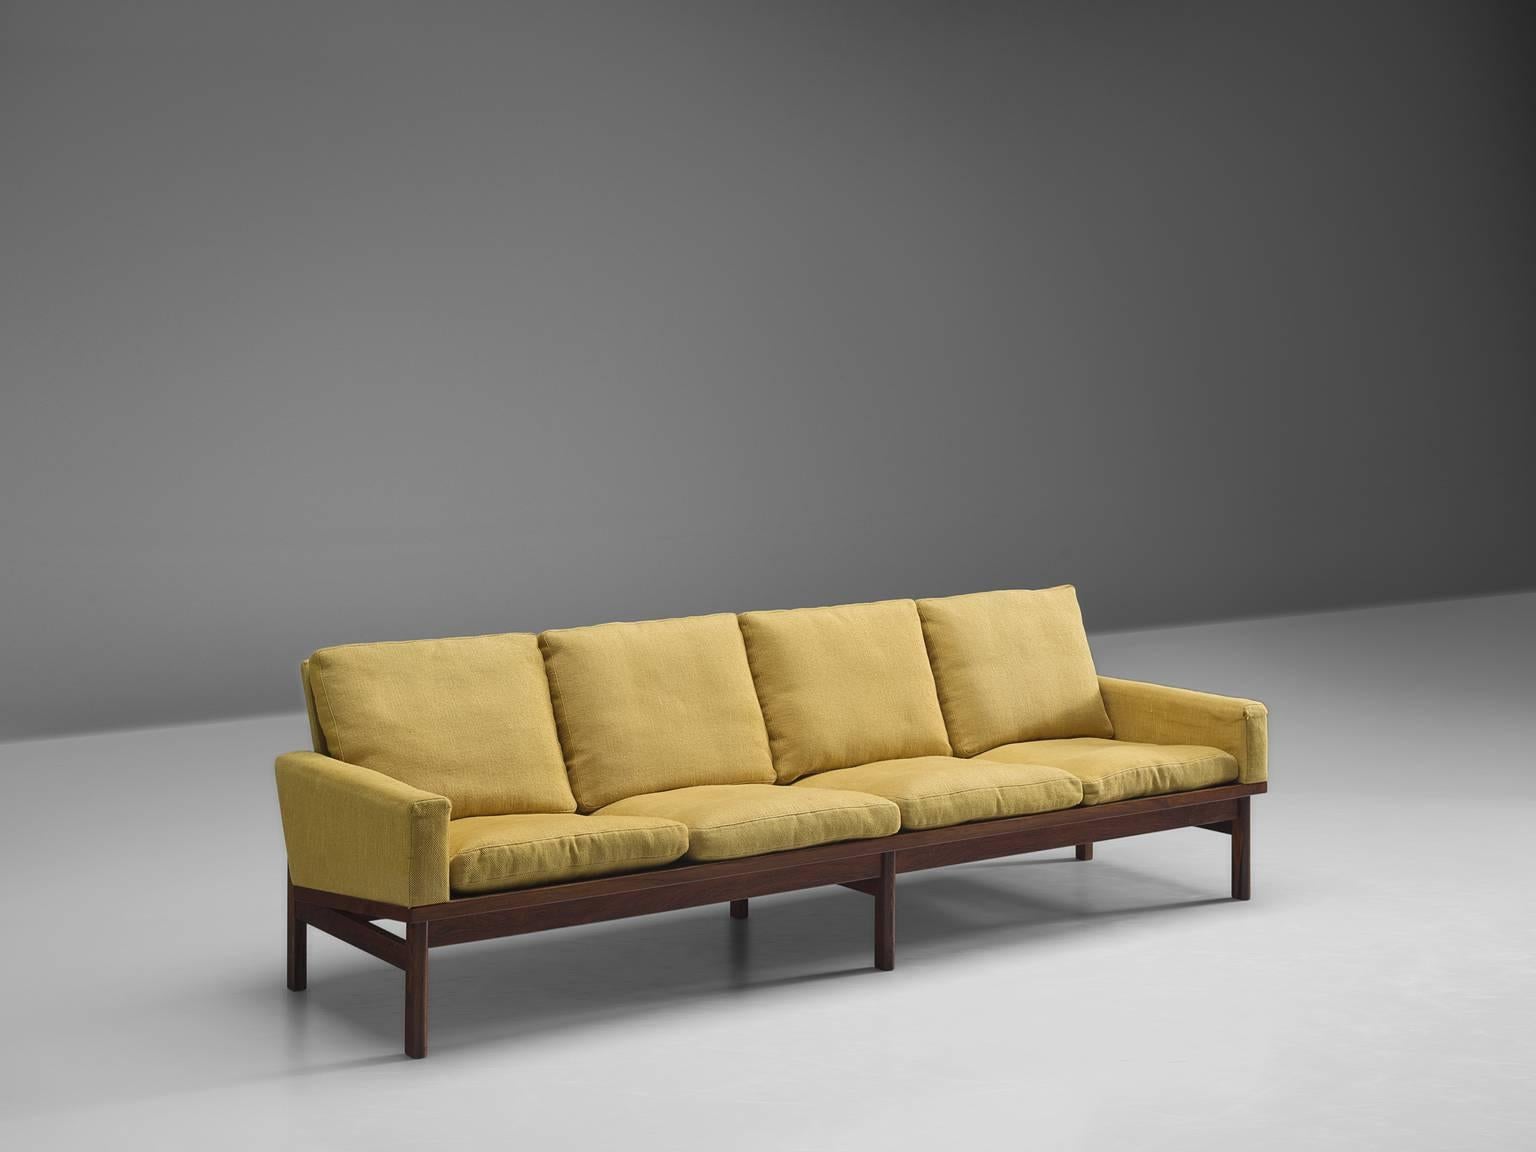 Settee, fabric and dark grained wood, Denmark, 1960s

This high quality sofa features thick cushions and a simplistic, geometric solid wooden frame. The sofa has eight legs and a tilted backrest in order to provide maximum comfort. Due to the high